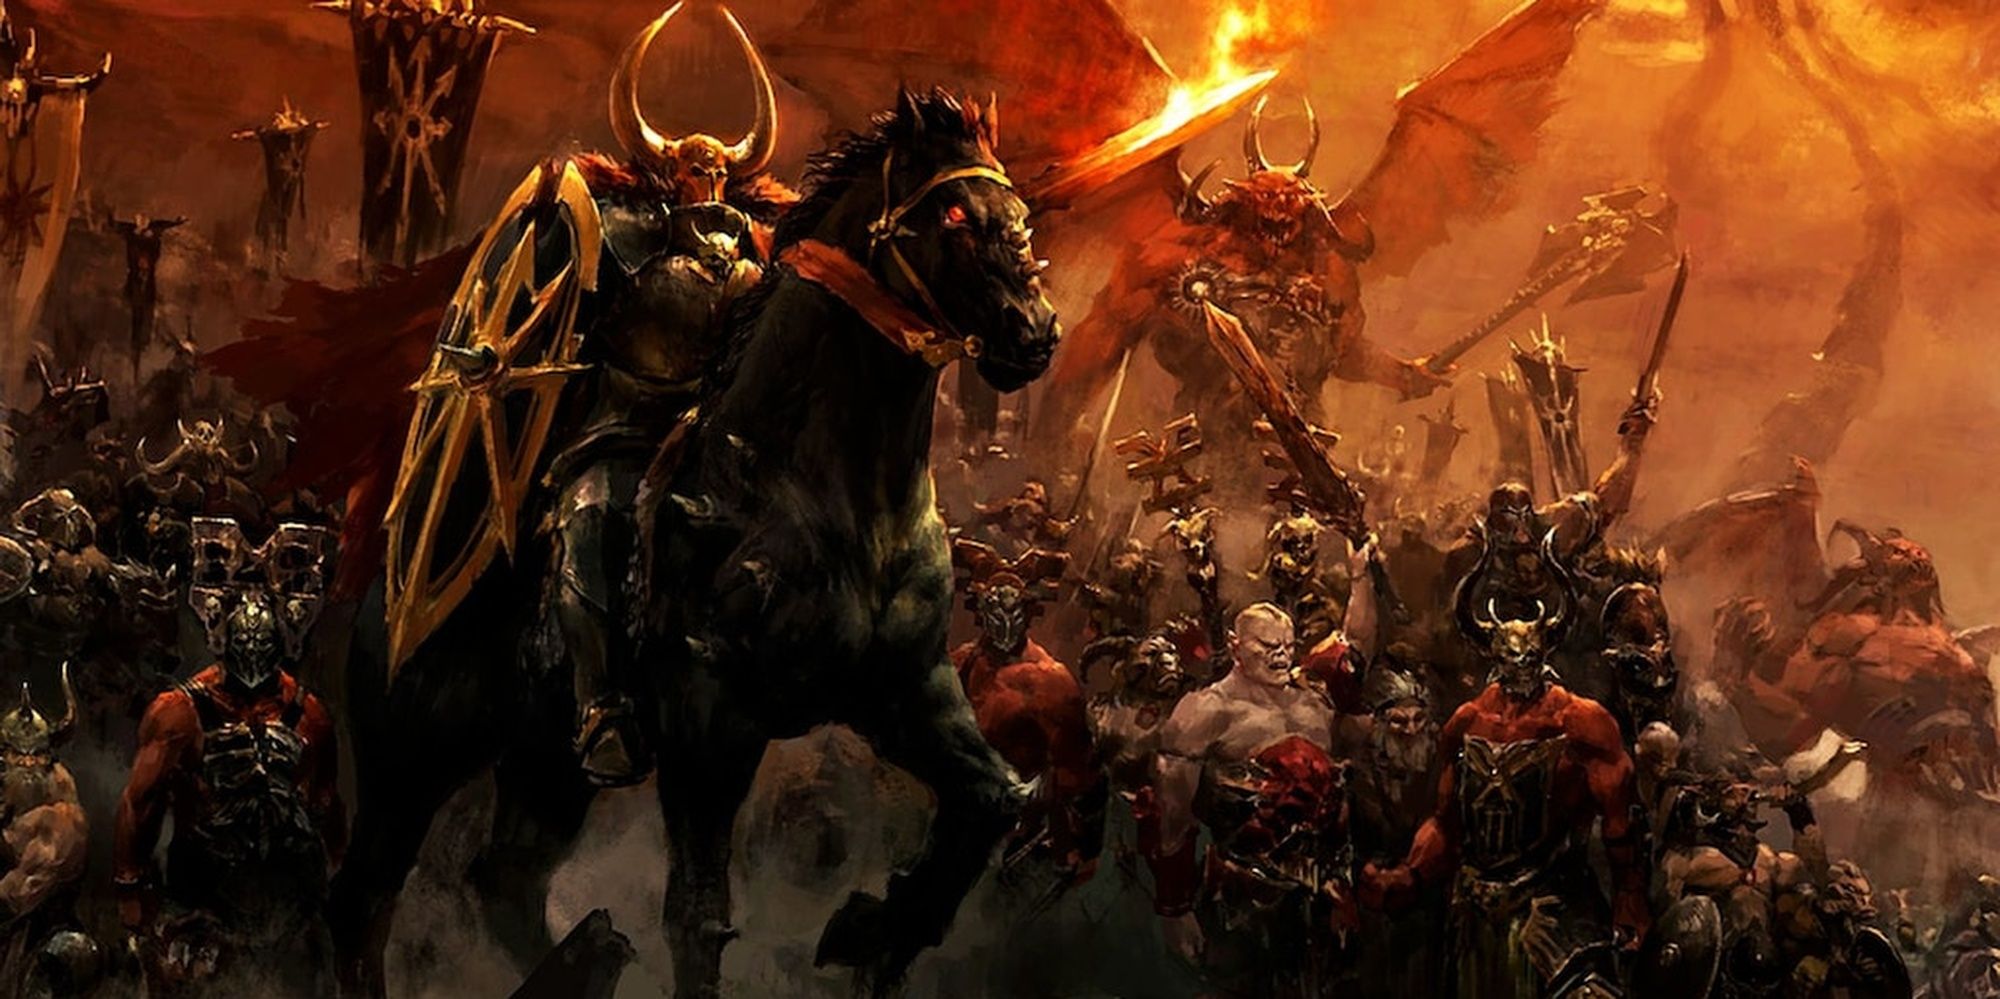 Total War: Warhammer 3 The Forces Of Chaos During The End Times From The Books